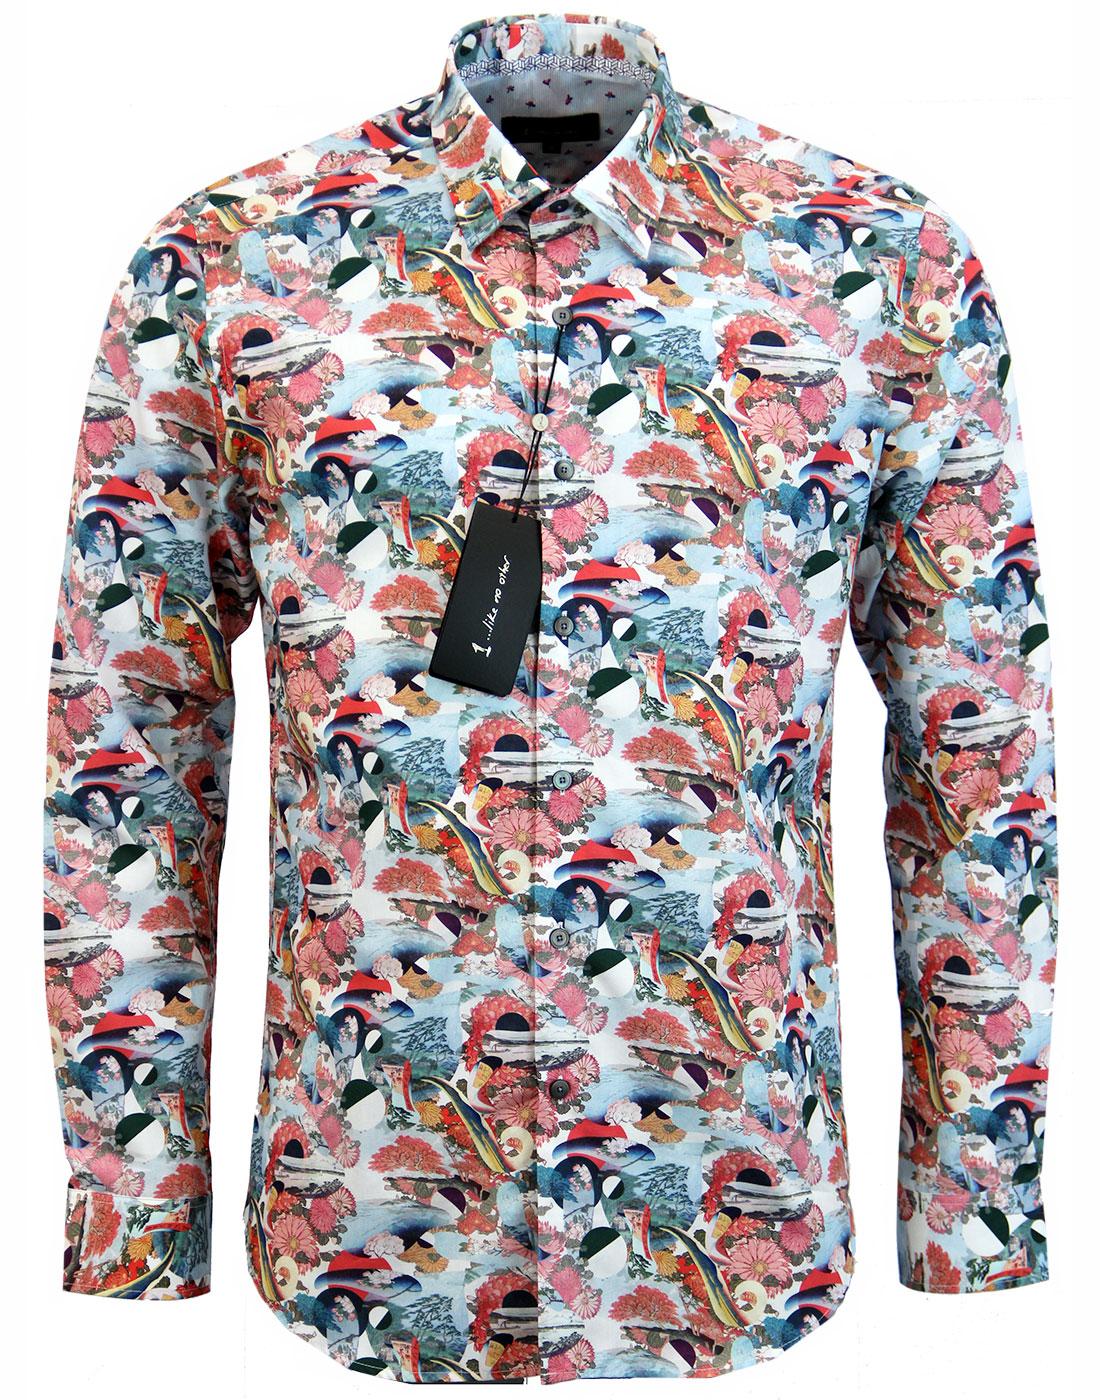 Post Cards 1 LIKE NO OTHER Retro Pop Collage Shirt